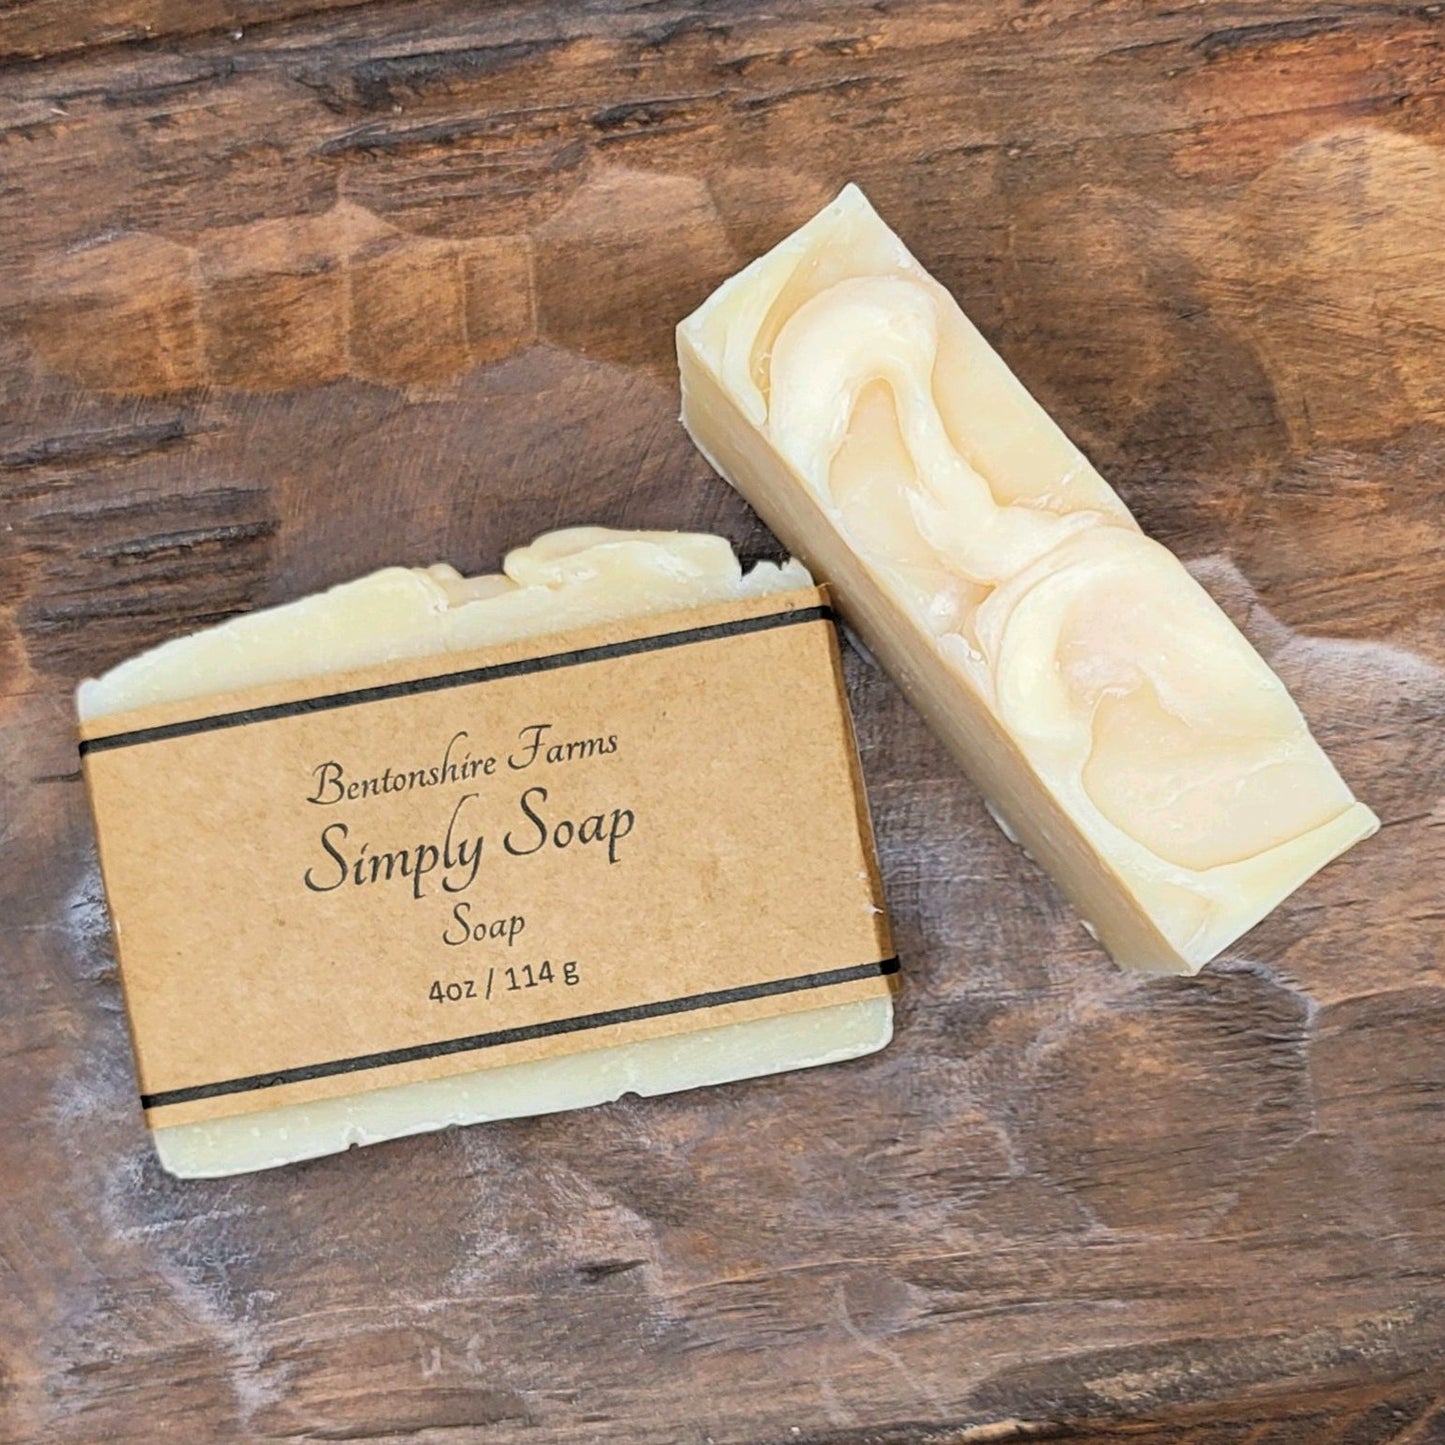 Simply Soap